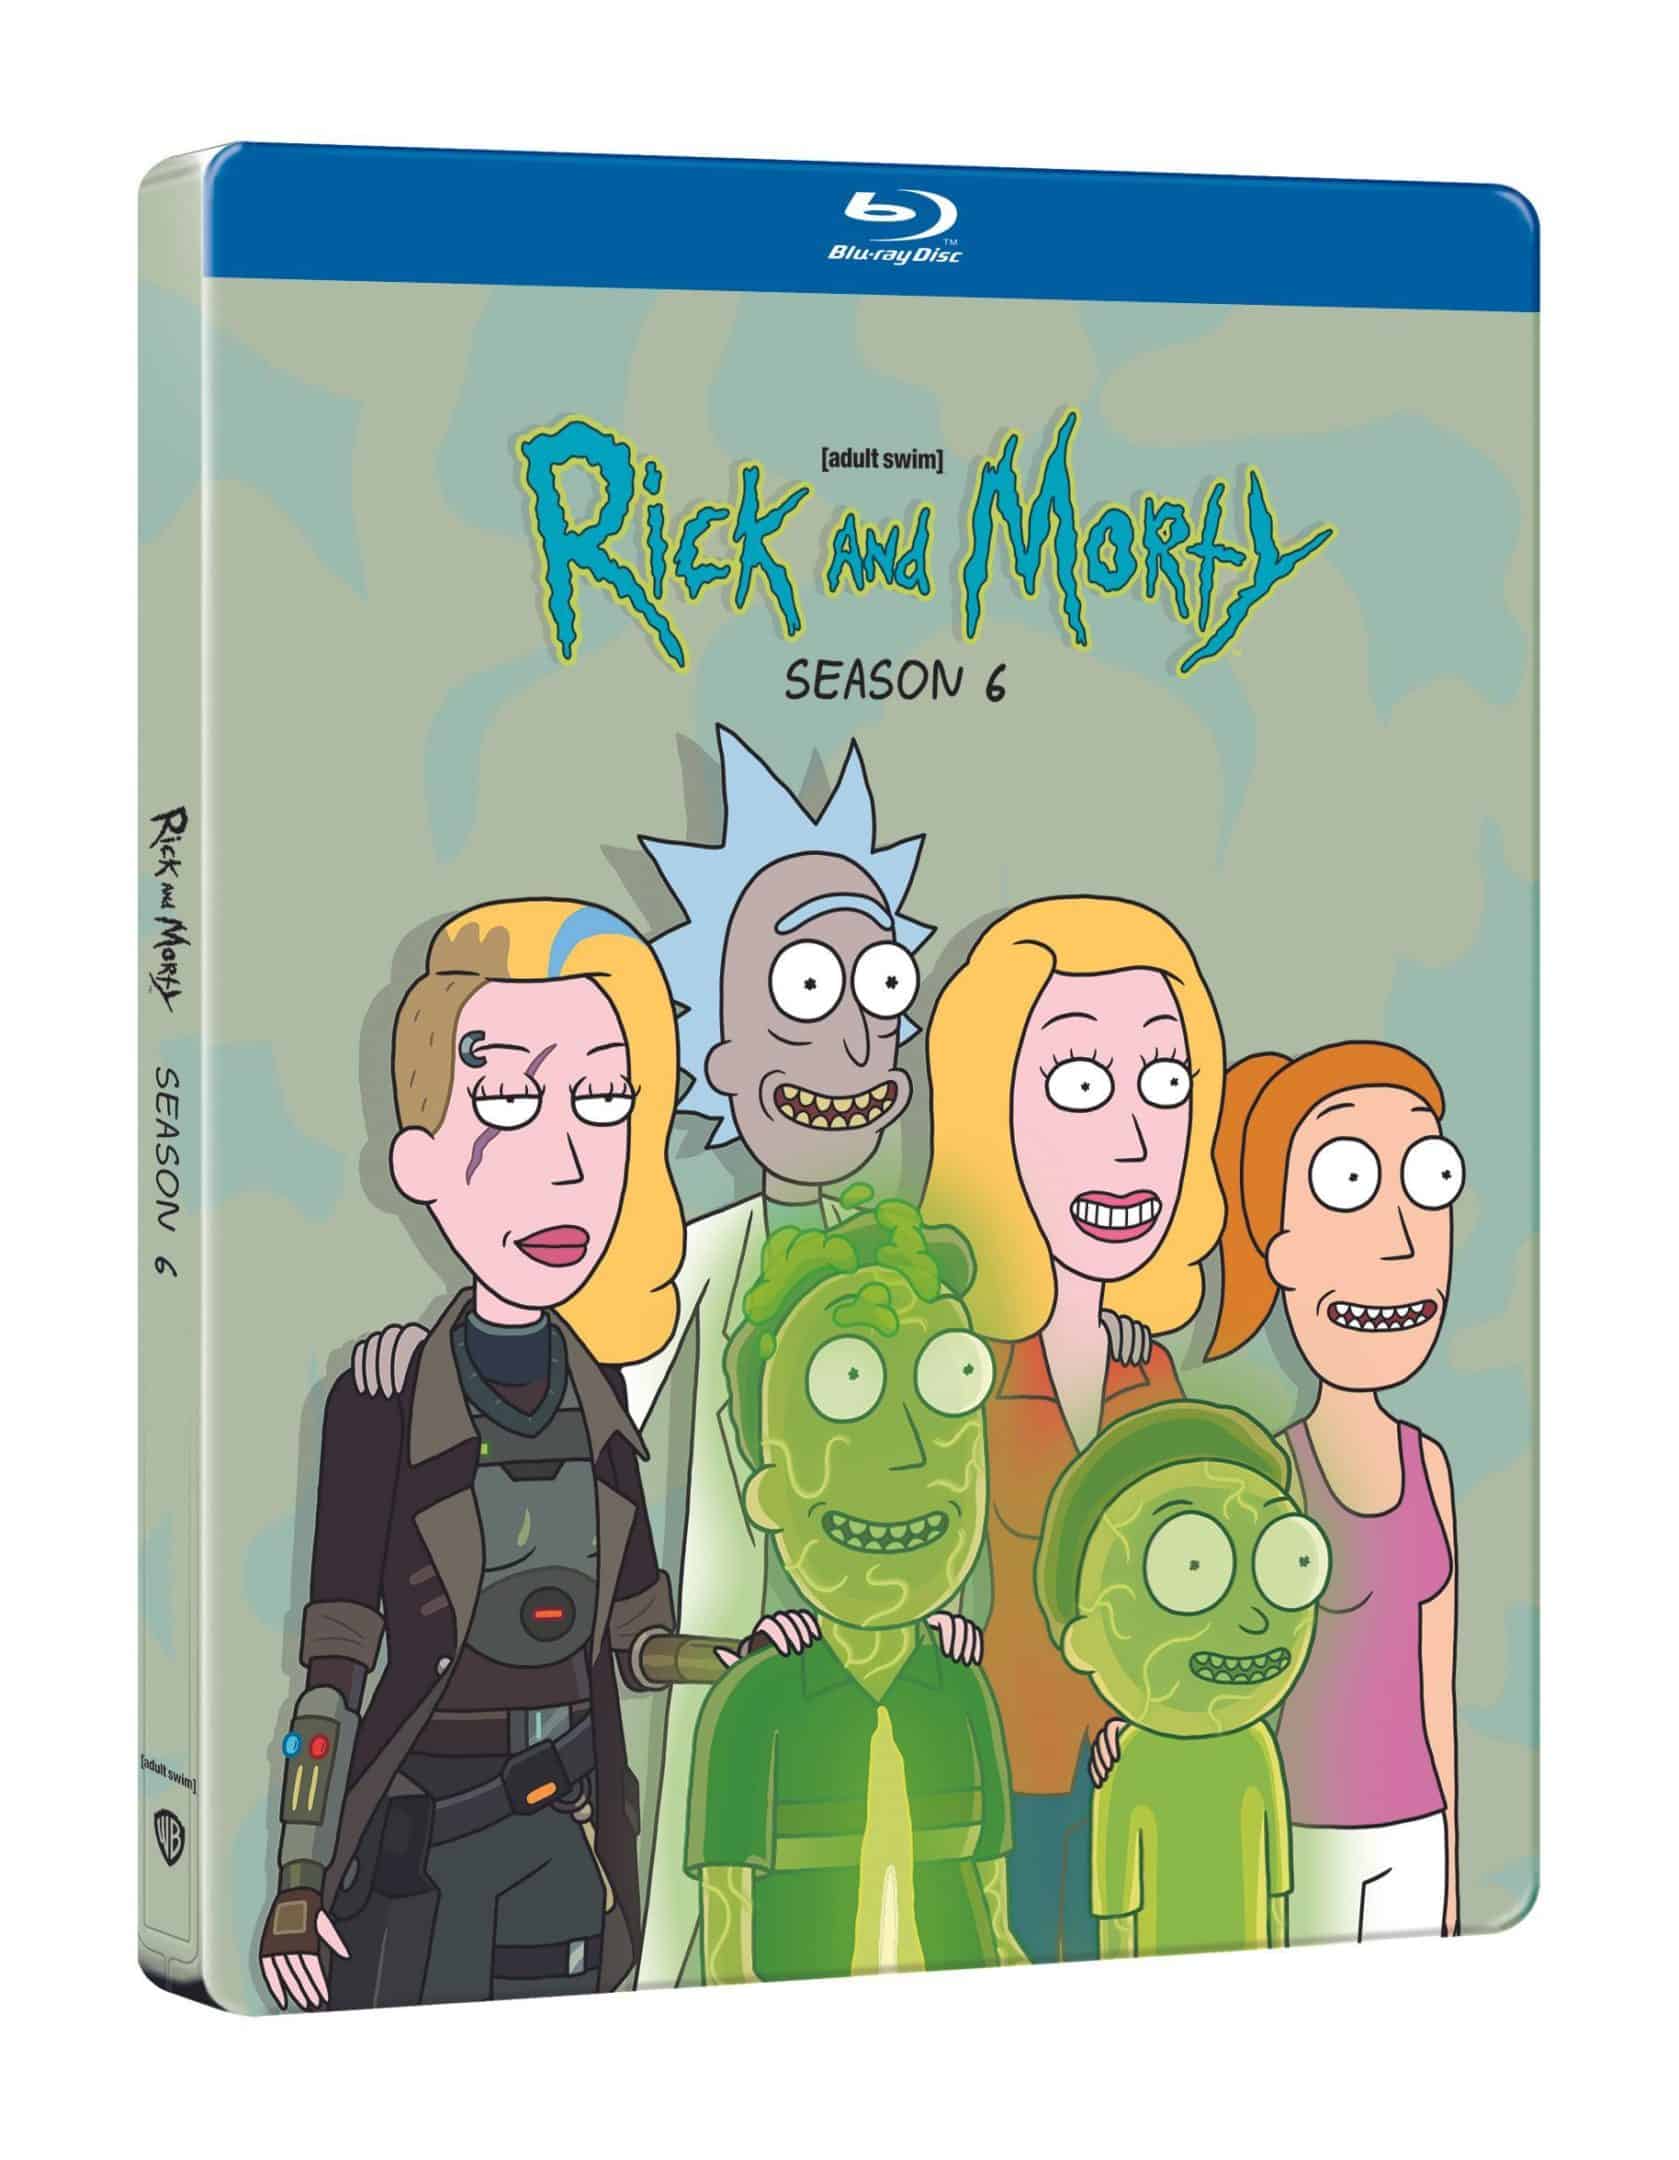 Rick and Morty Season 6 comes to Blu-ray and Steelbook on March 28th 19